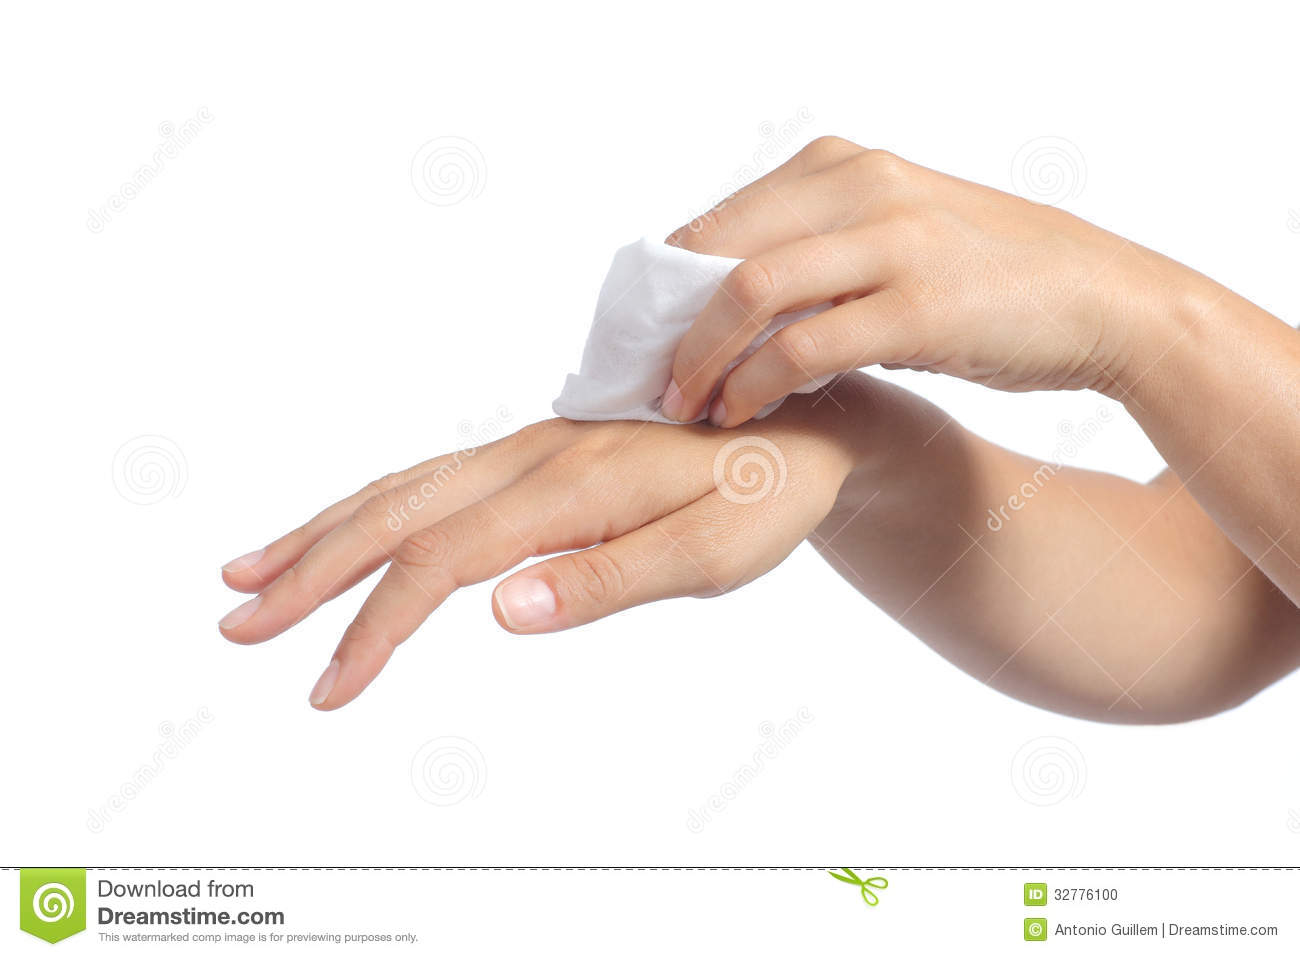 Hands Of A Woman Cleaning With A Baby Wipe Stock Photo   Image    